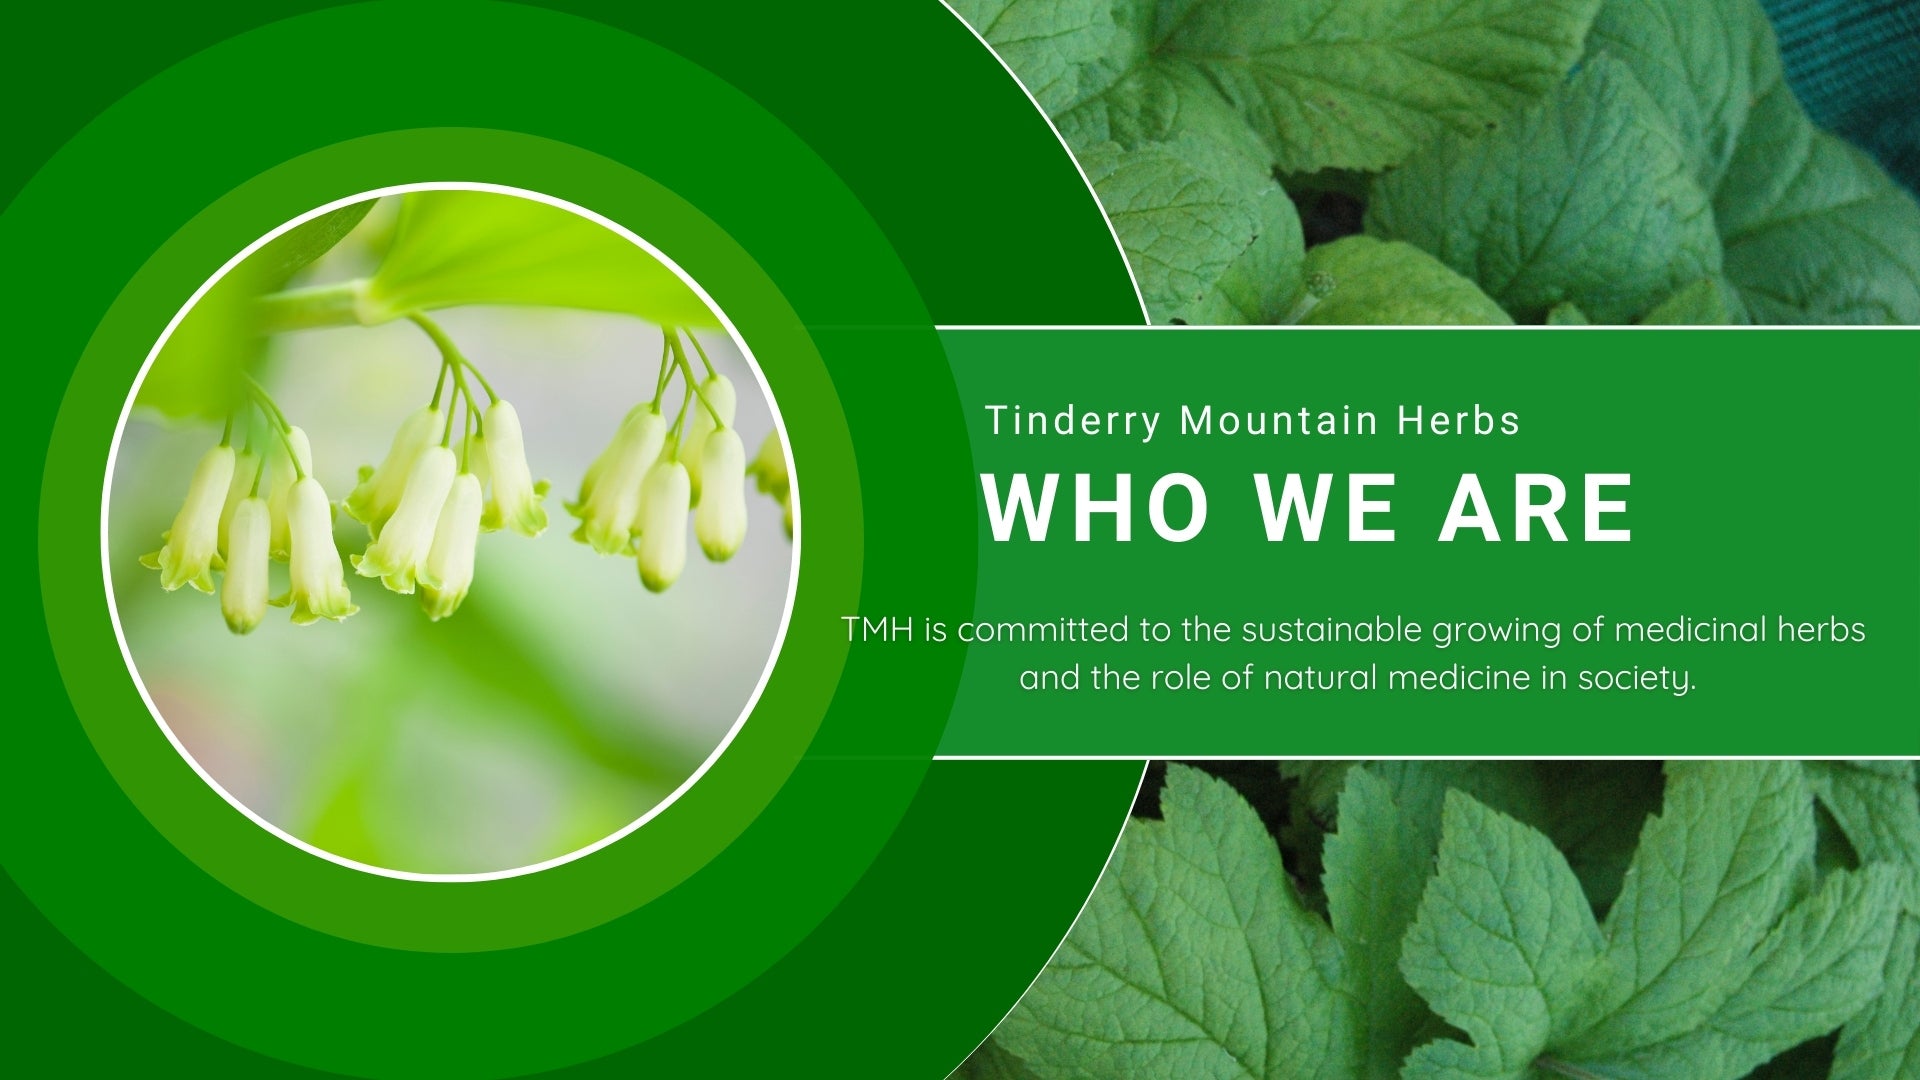 Load video: Tinderry Mountain Herbs is committed to the sustainable growing of medicinal herbs and the role of natural medicine in society.  Tinderry Mountain Herbs sustainably grows select medicinal herbs, educates people about natural medicine and makes a unique natural skin care range.